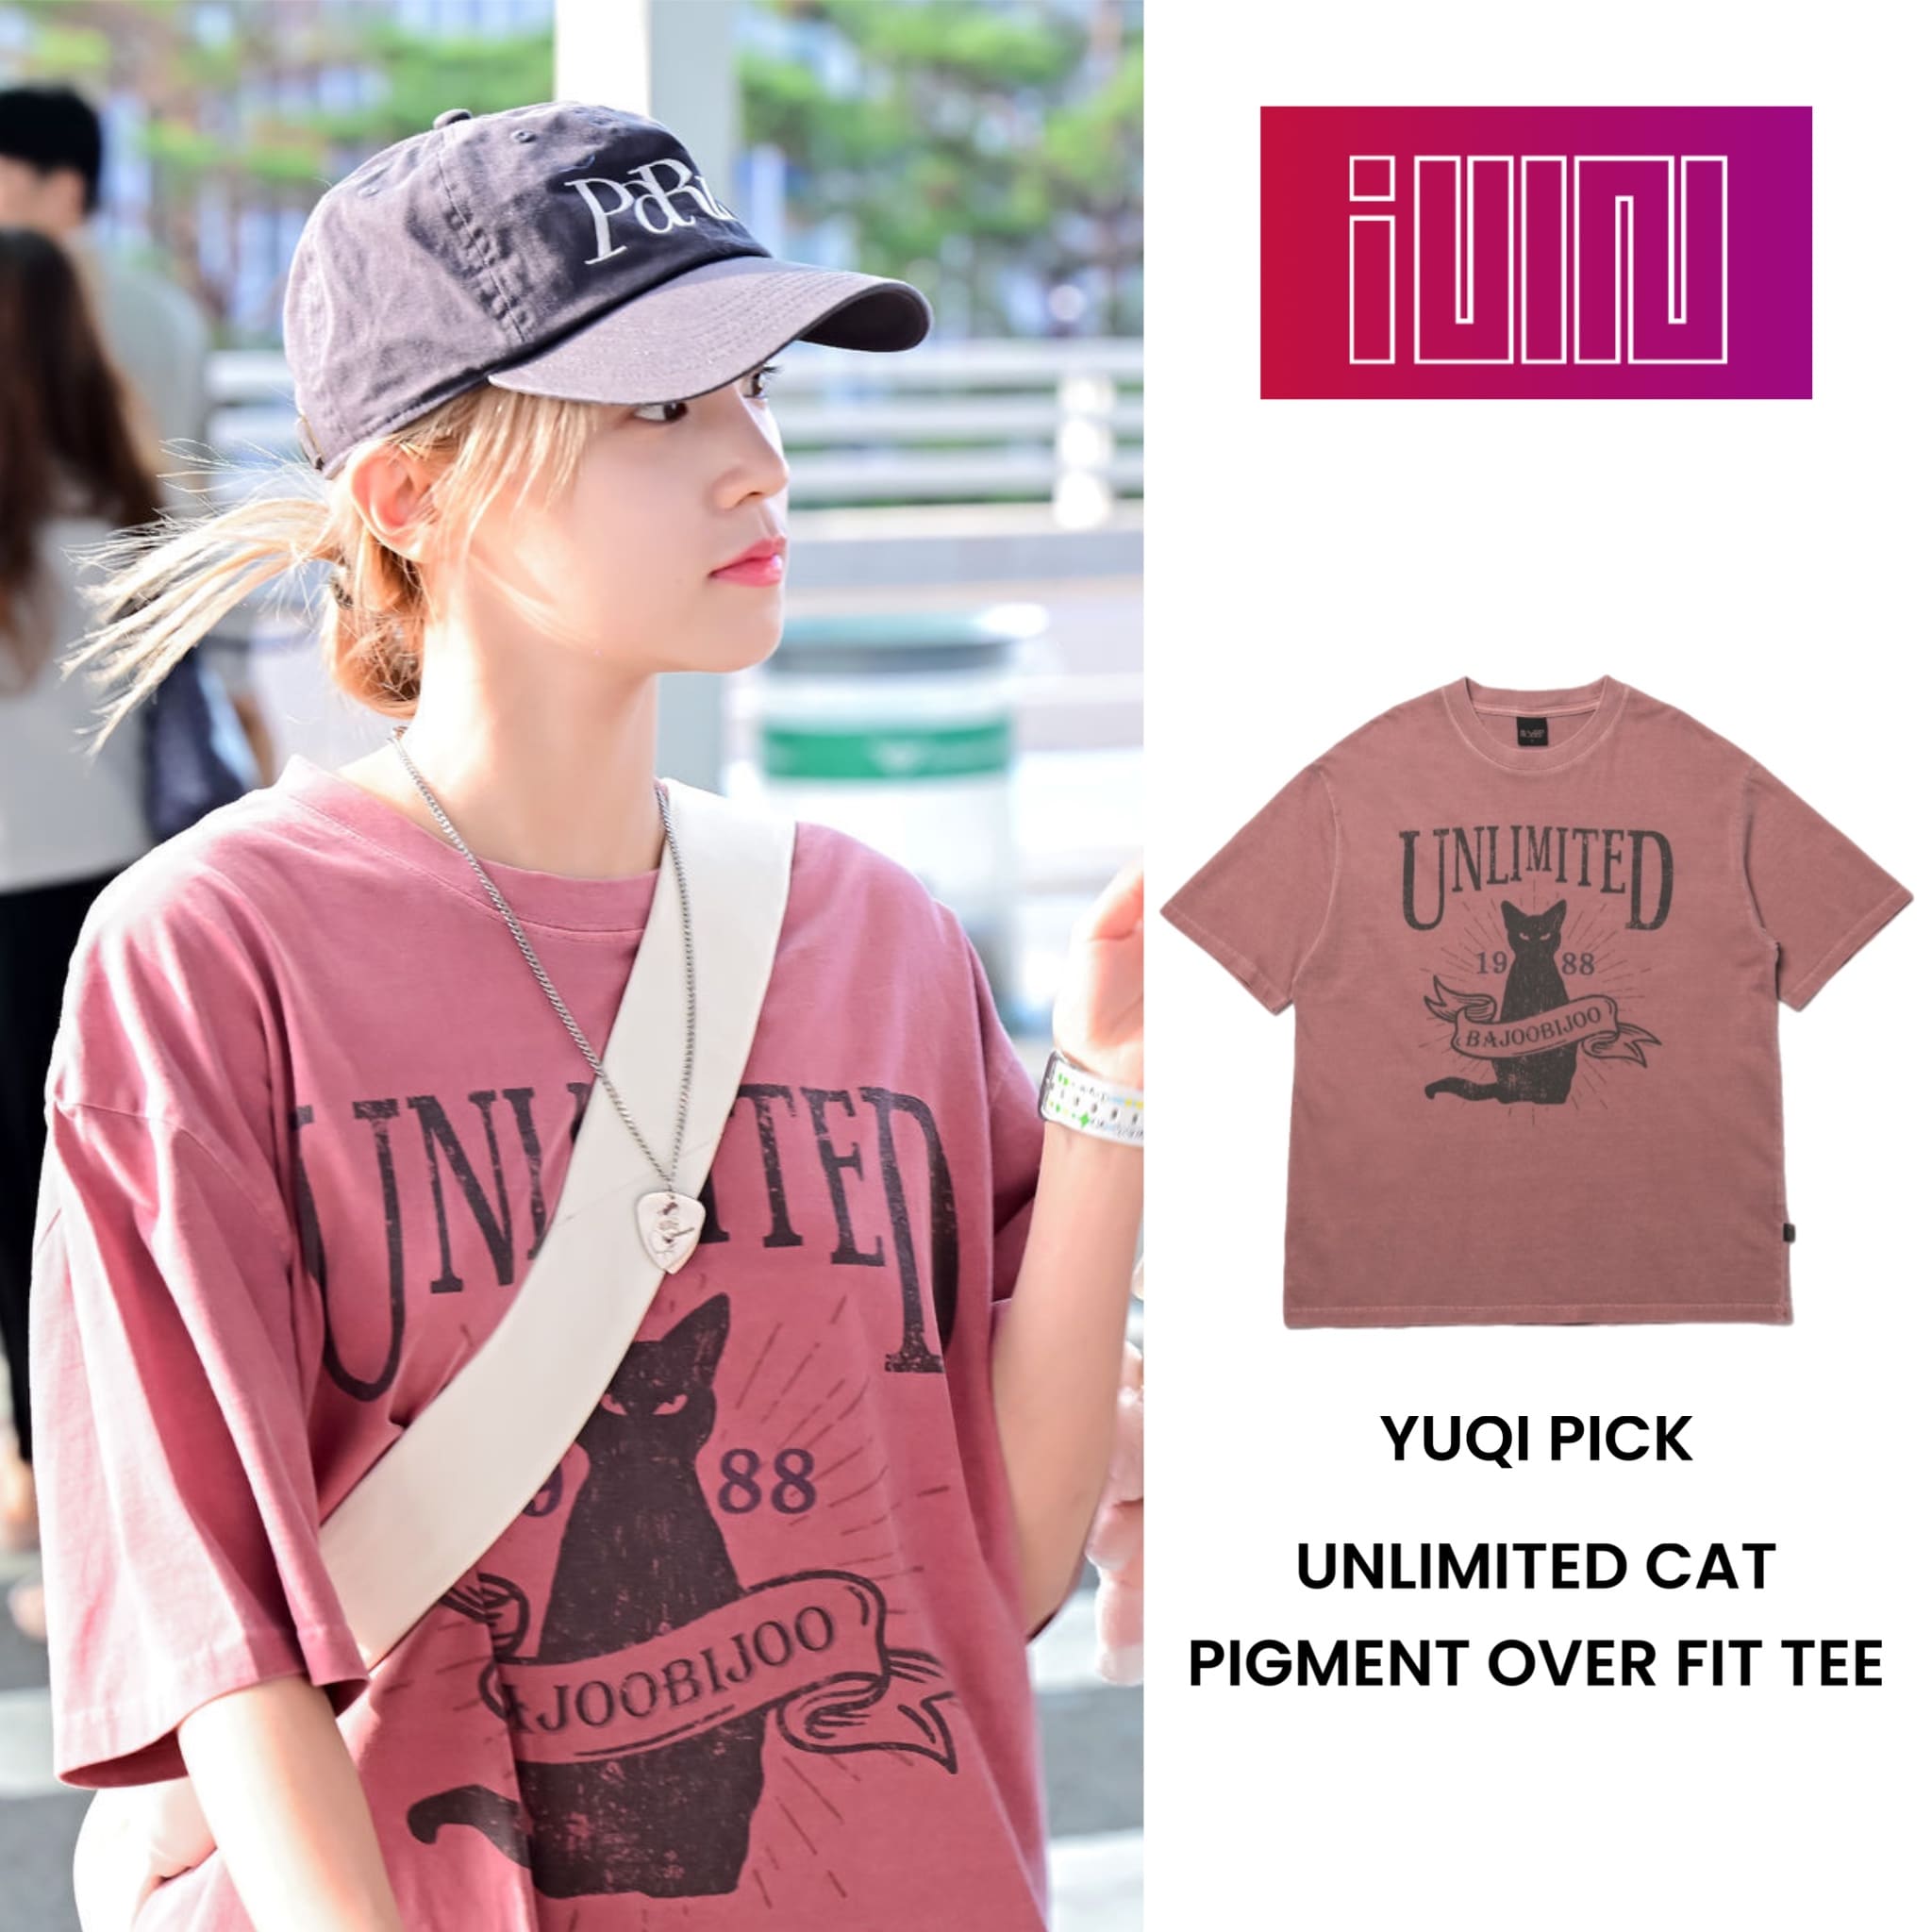 G)-IDLE YUQI PICK UNLIMITED CAT PIGMENT OVER FIT TEE – Bora Clover